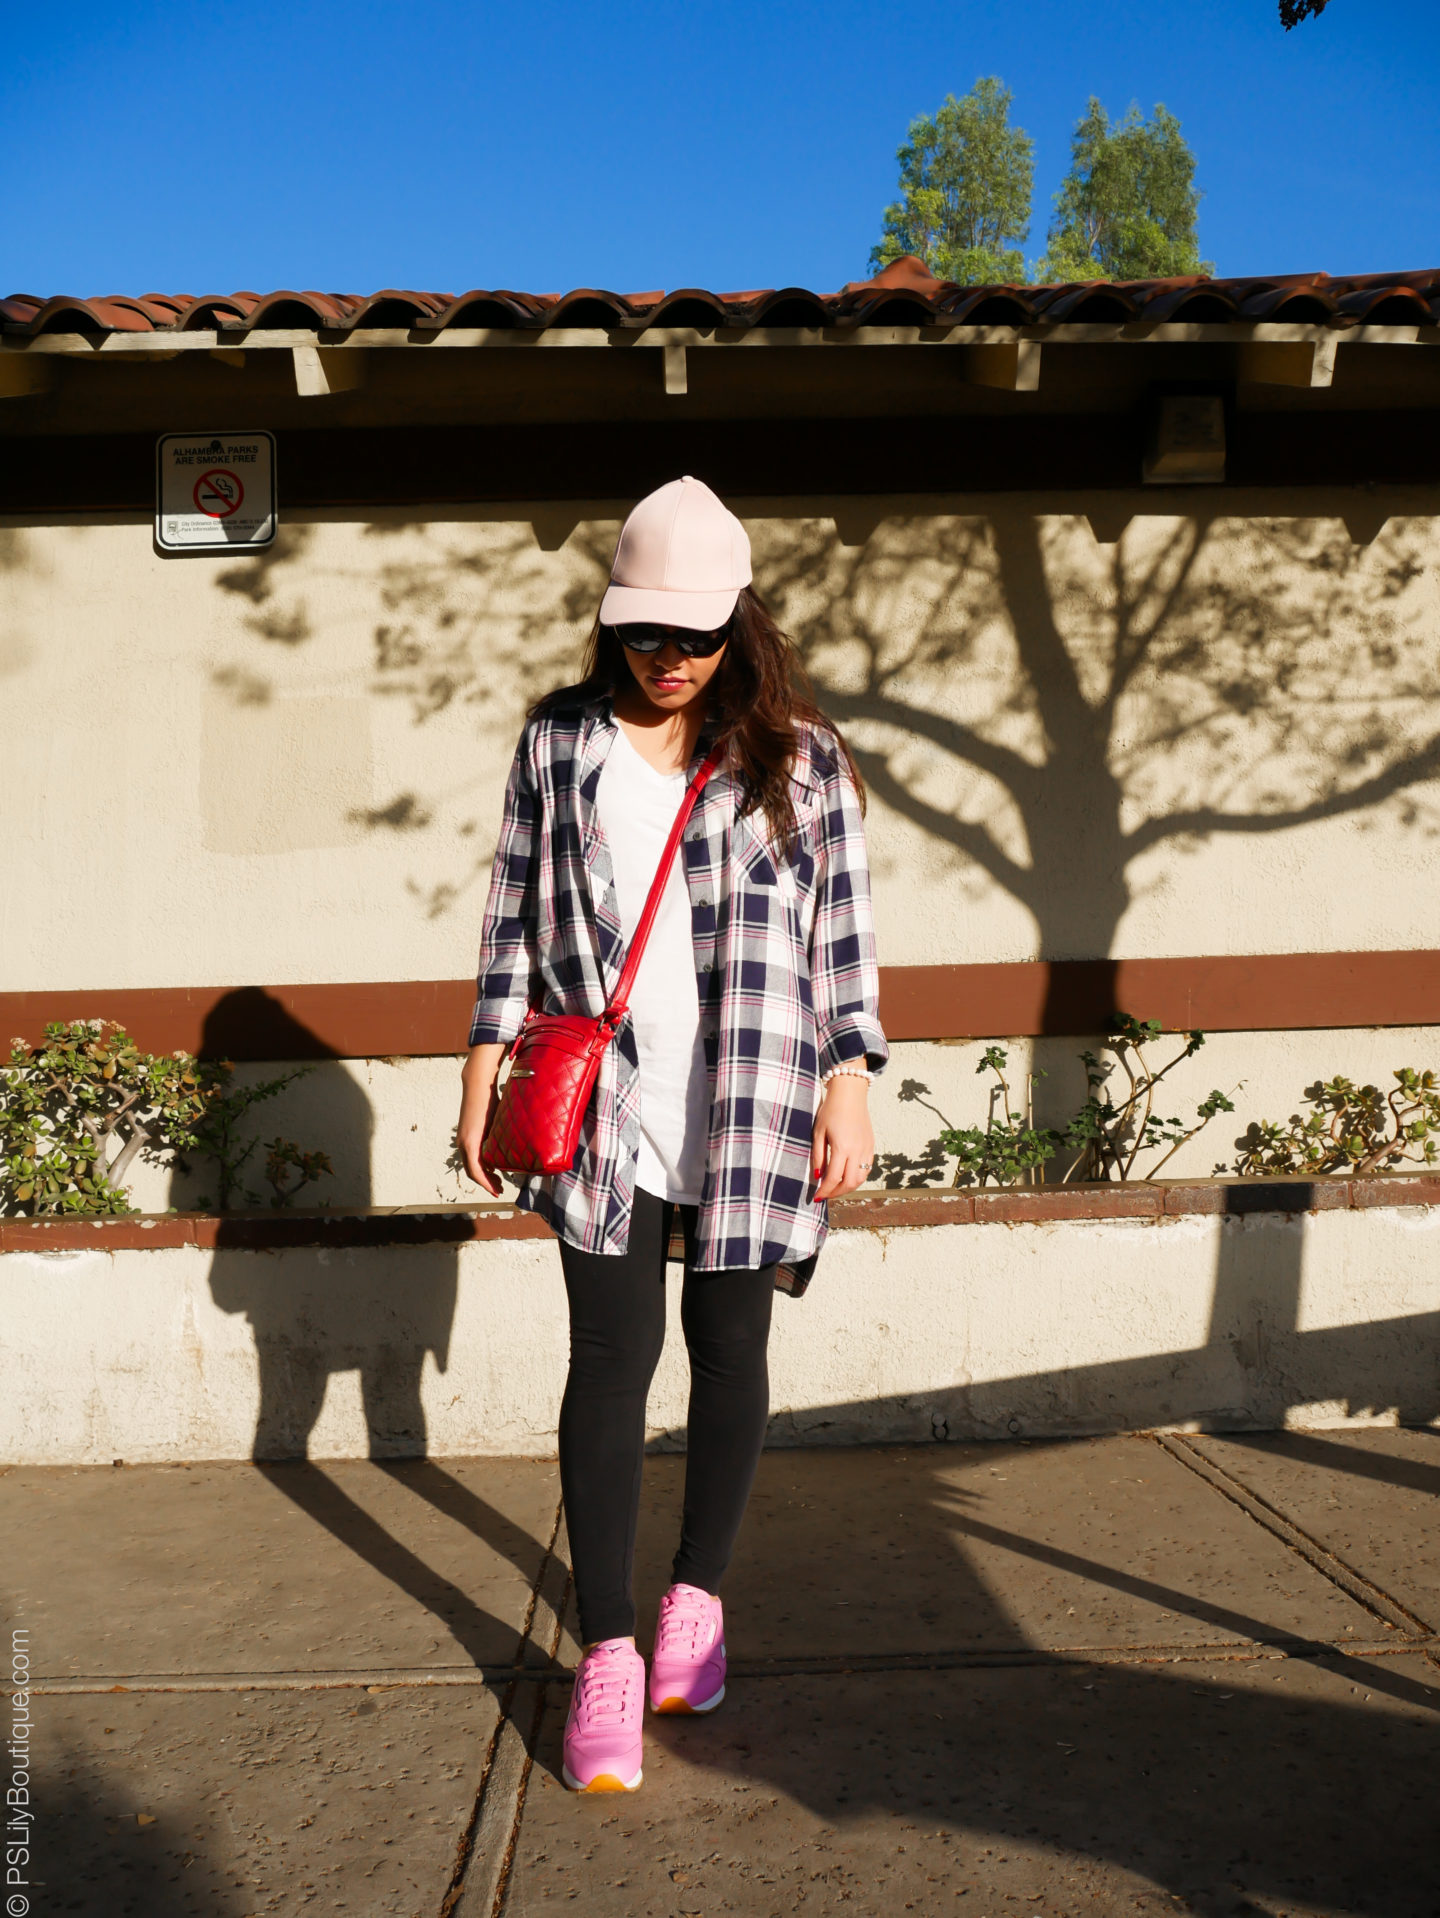 Gone Plaid... | PSLily Boutique, Instagram: @pslilyboutique, Pinterest, Los Angeles fashion blogger, top fashion blog, best fashion blog, fashion & personal style blog, travel blog, LA fashion blogger, my style, street style, 2.6.18, lookbook, daily look, ootd, KUT from the KLOTH blue and white plaid shirt, pink leather Reebok classic sneakers shoes, light pink H&M hat, red leather quilted Stone Mountain mini crossbody bag, park, 2.6.18, winter 2018 outfit ideas 